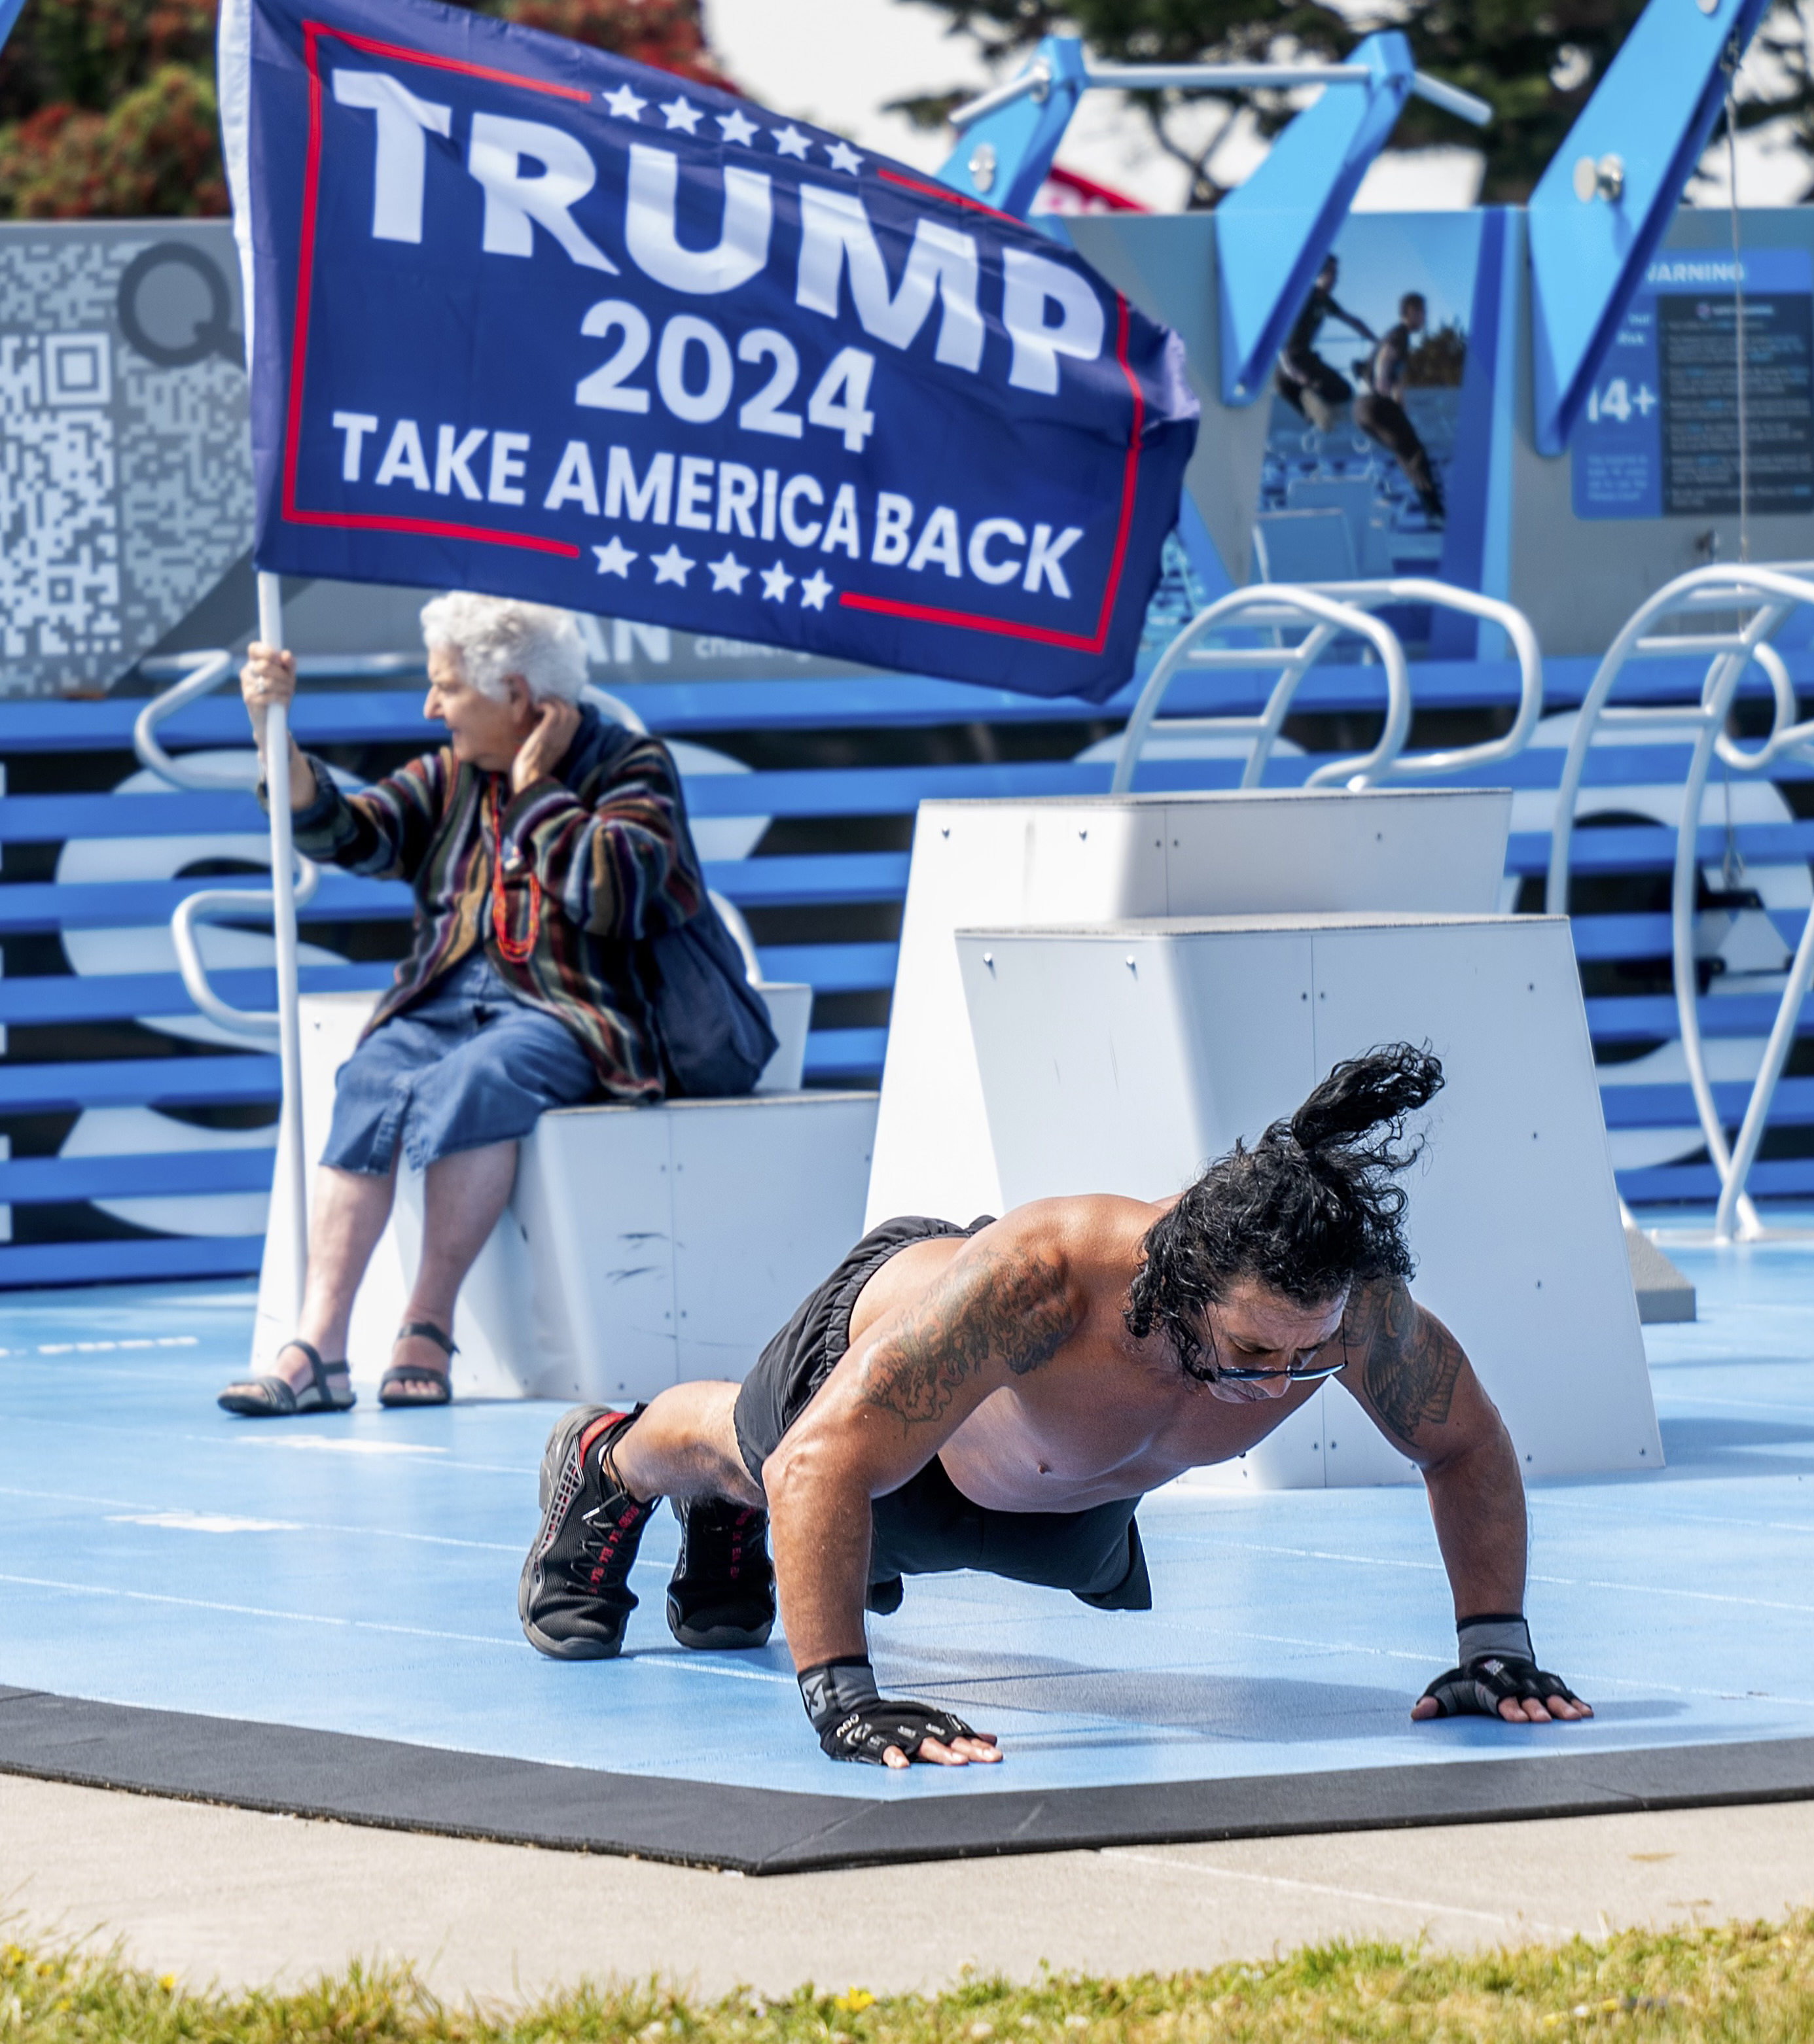 An elderly person holds a &quot;Trump 2024 Take America Back&quot; flag while sitting. In the foreground, a man is doing push-ups on a blue exercise platform.